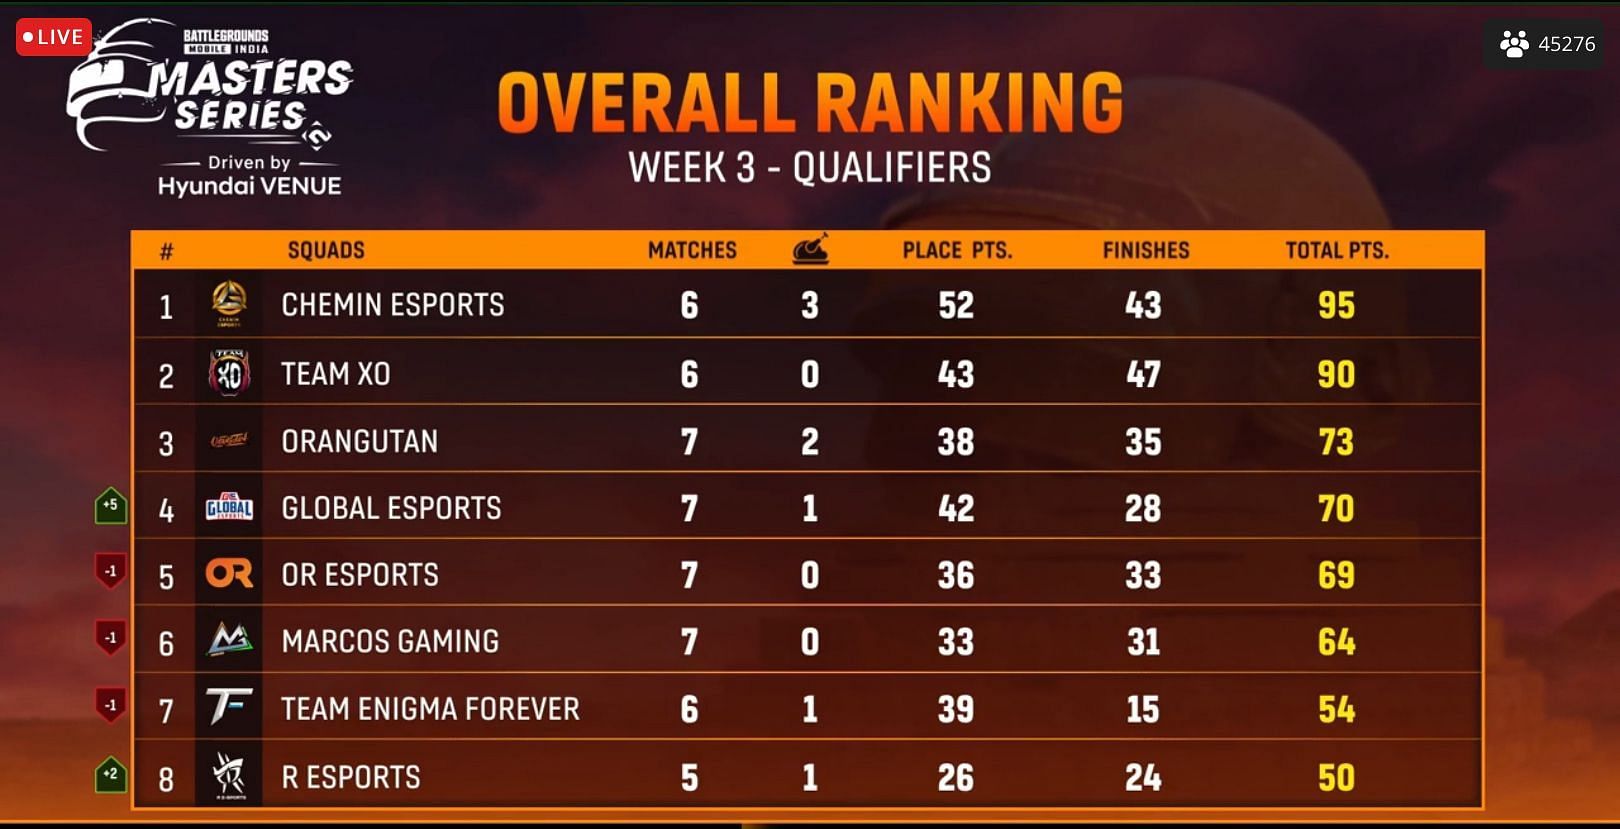 Global Esports grabbed fourth place after BGMI Masters Series Week 3 Day 3 (Image via Loco)